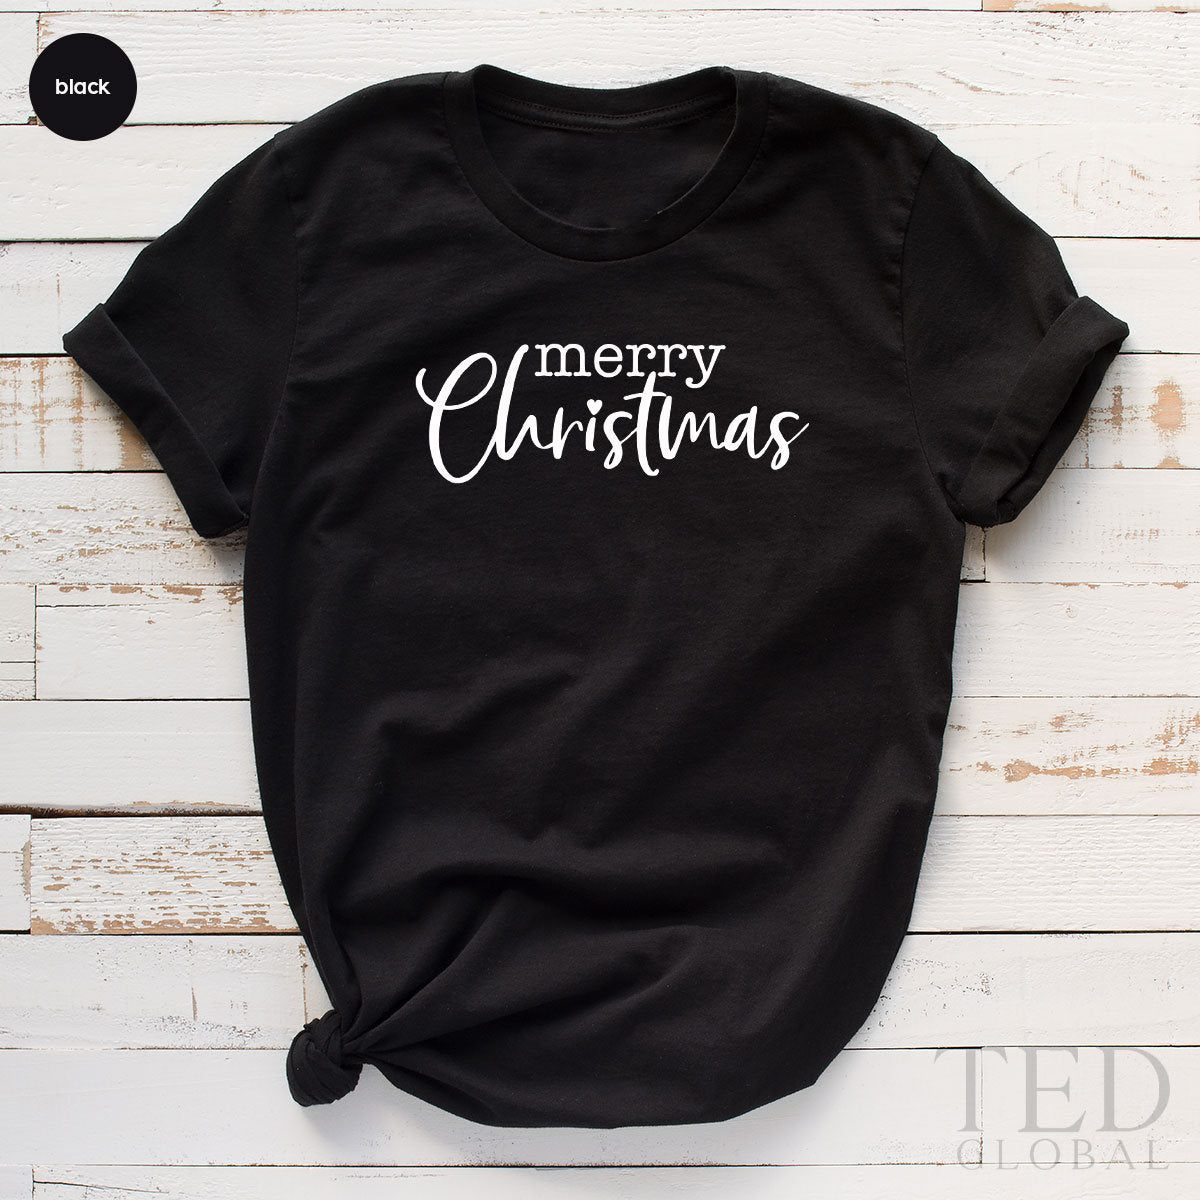 Cute Merry Noel T-Shirt, Funny Family Christmas T Shirt, Holiday Outfit Shirts, Happy Winter Shirt, Xmas TShirt, Gift For Christmas - Fastdeliverytees.com